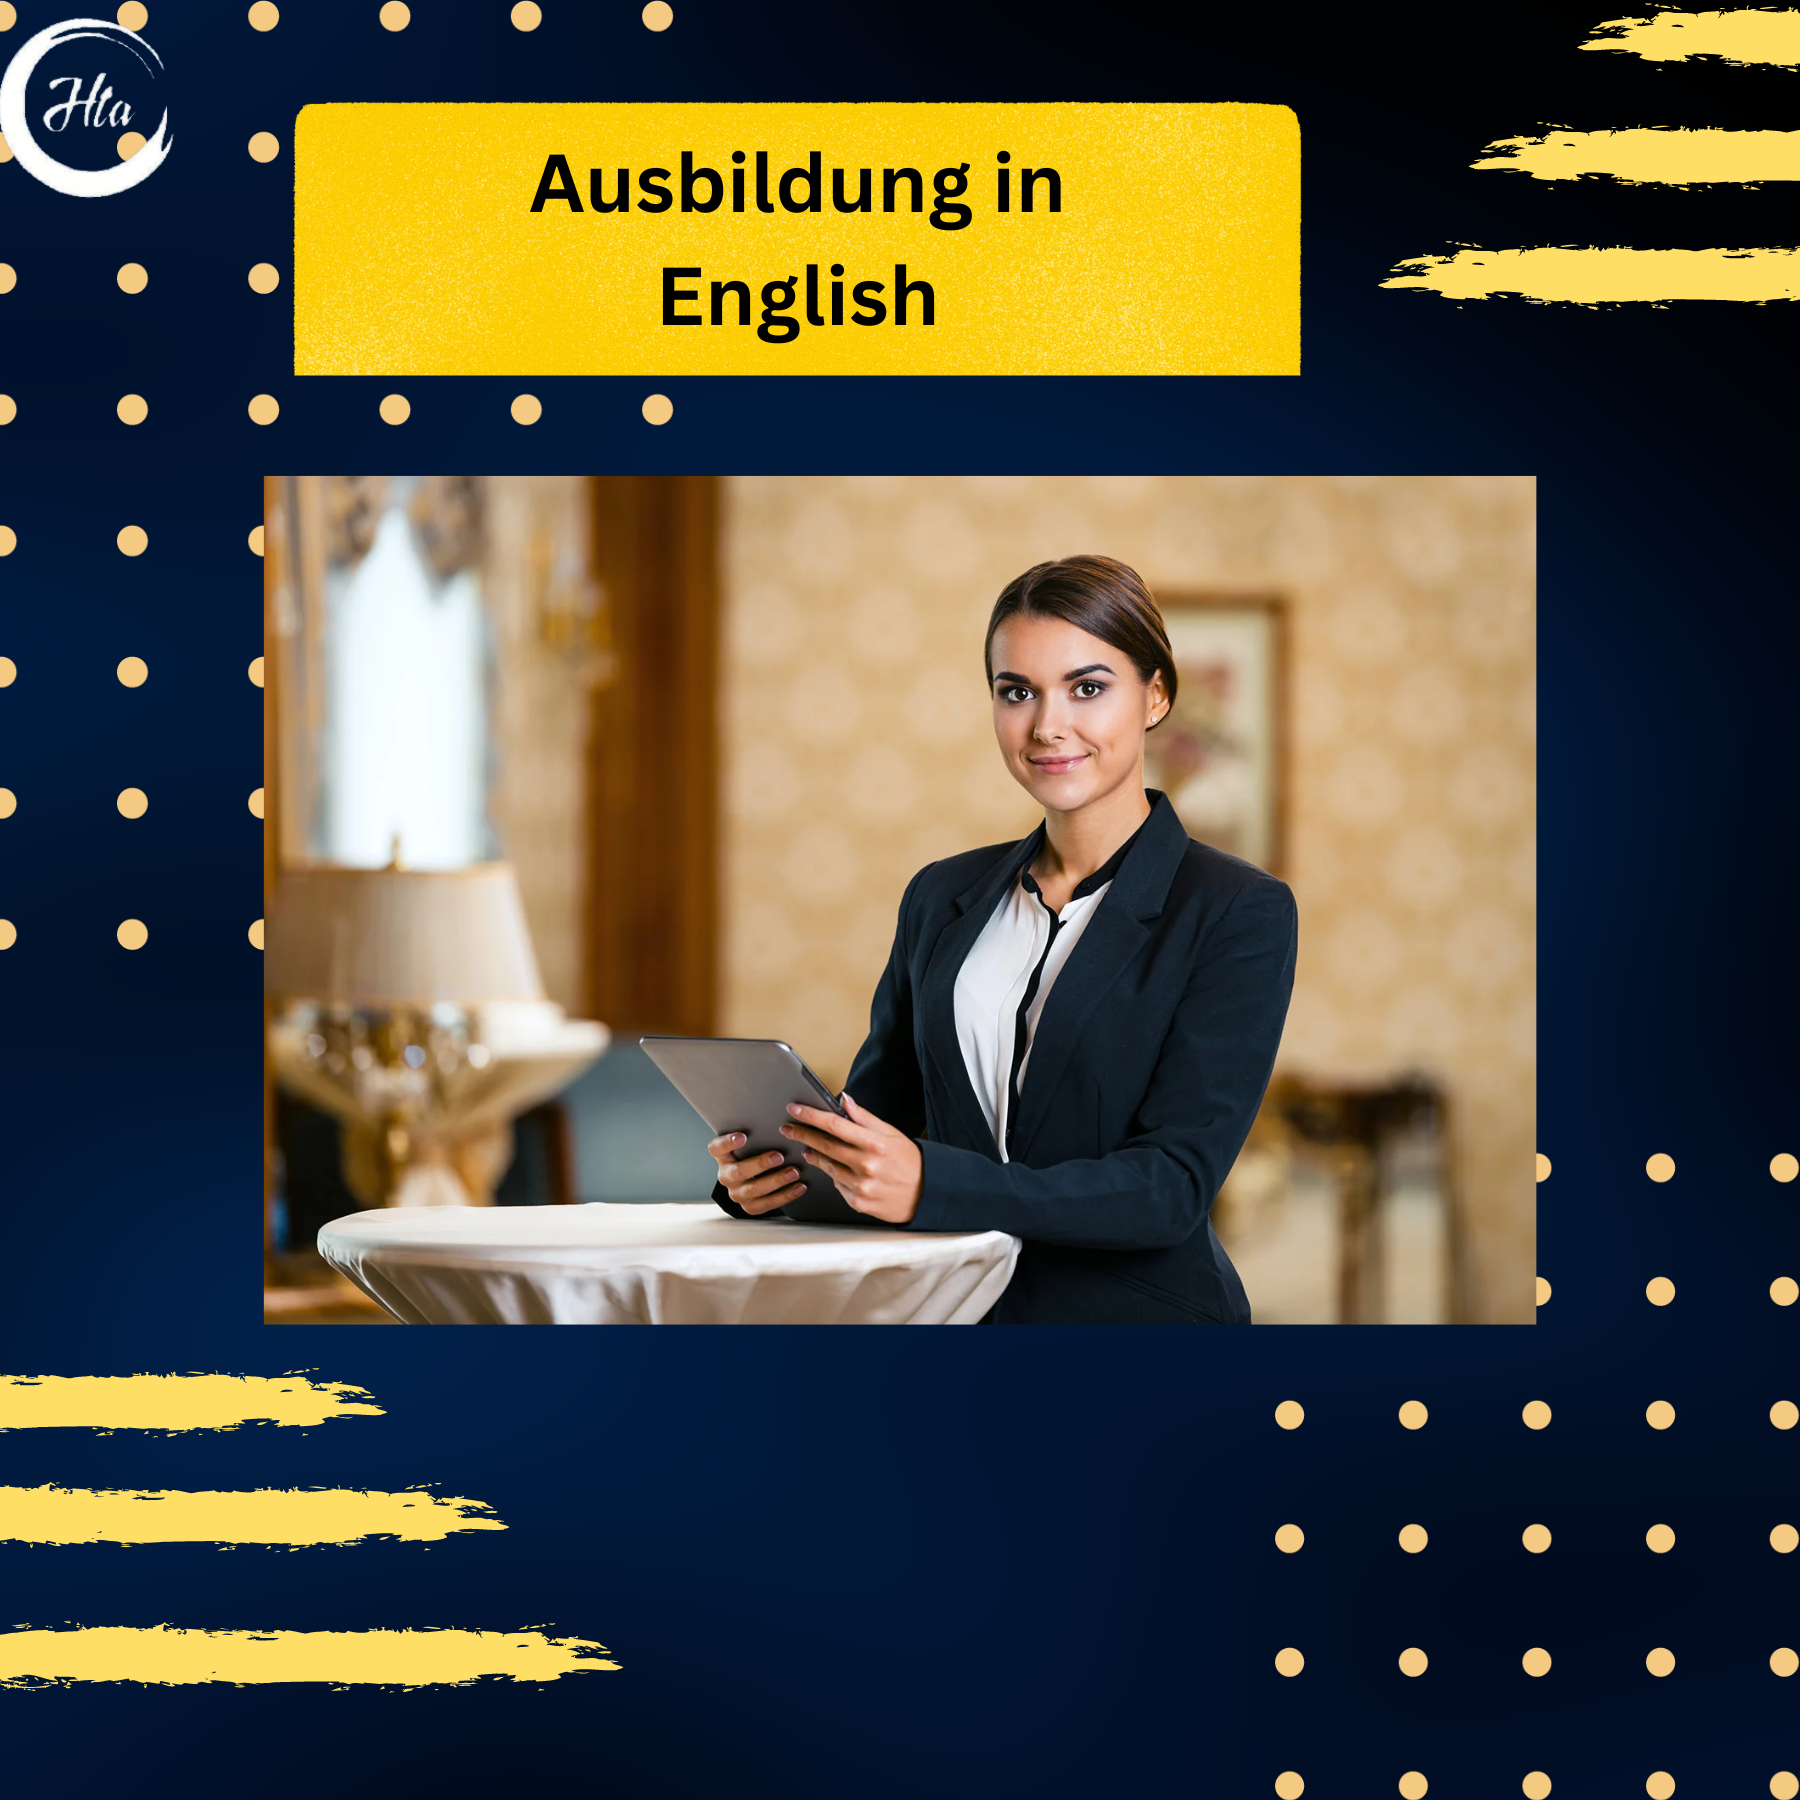 ausbildung-in-english-everything-you-need-to-know-how-to-abroad